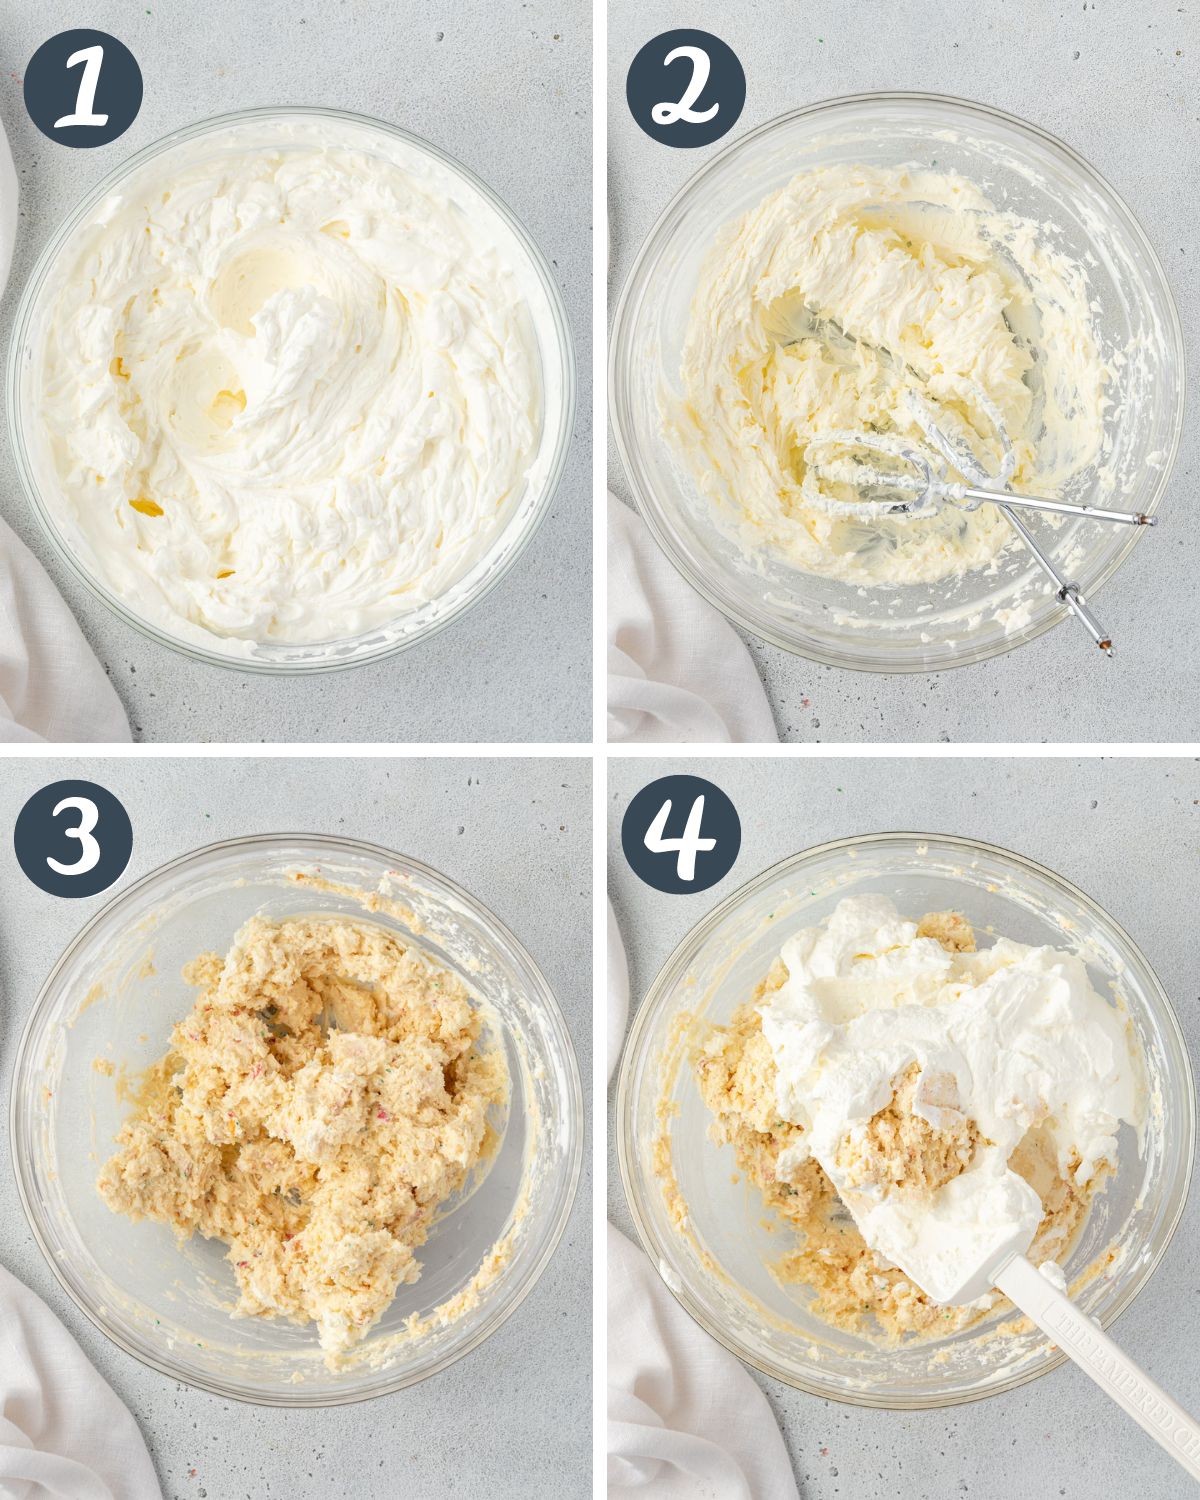 4 images showing the steps to make christmas tree dip.